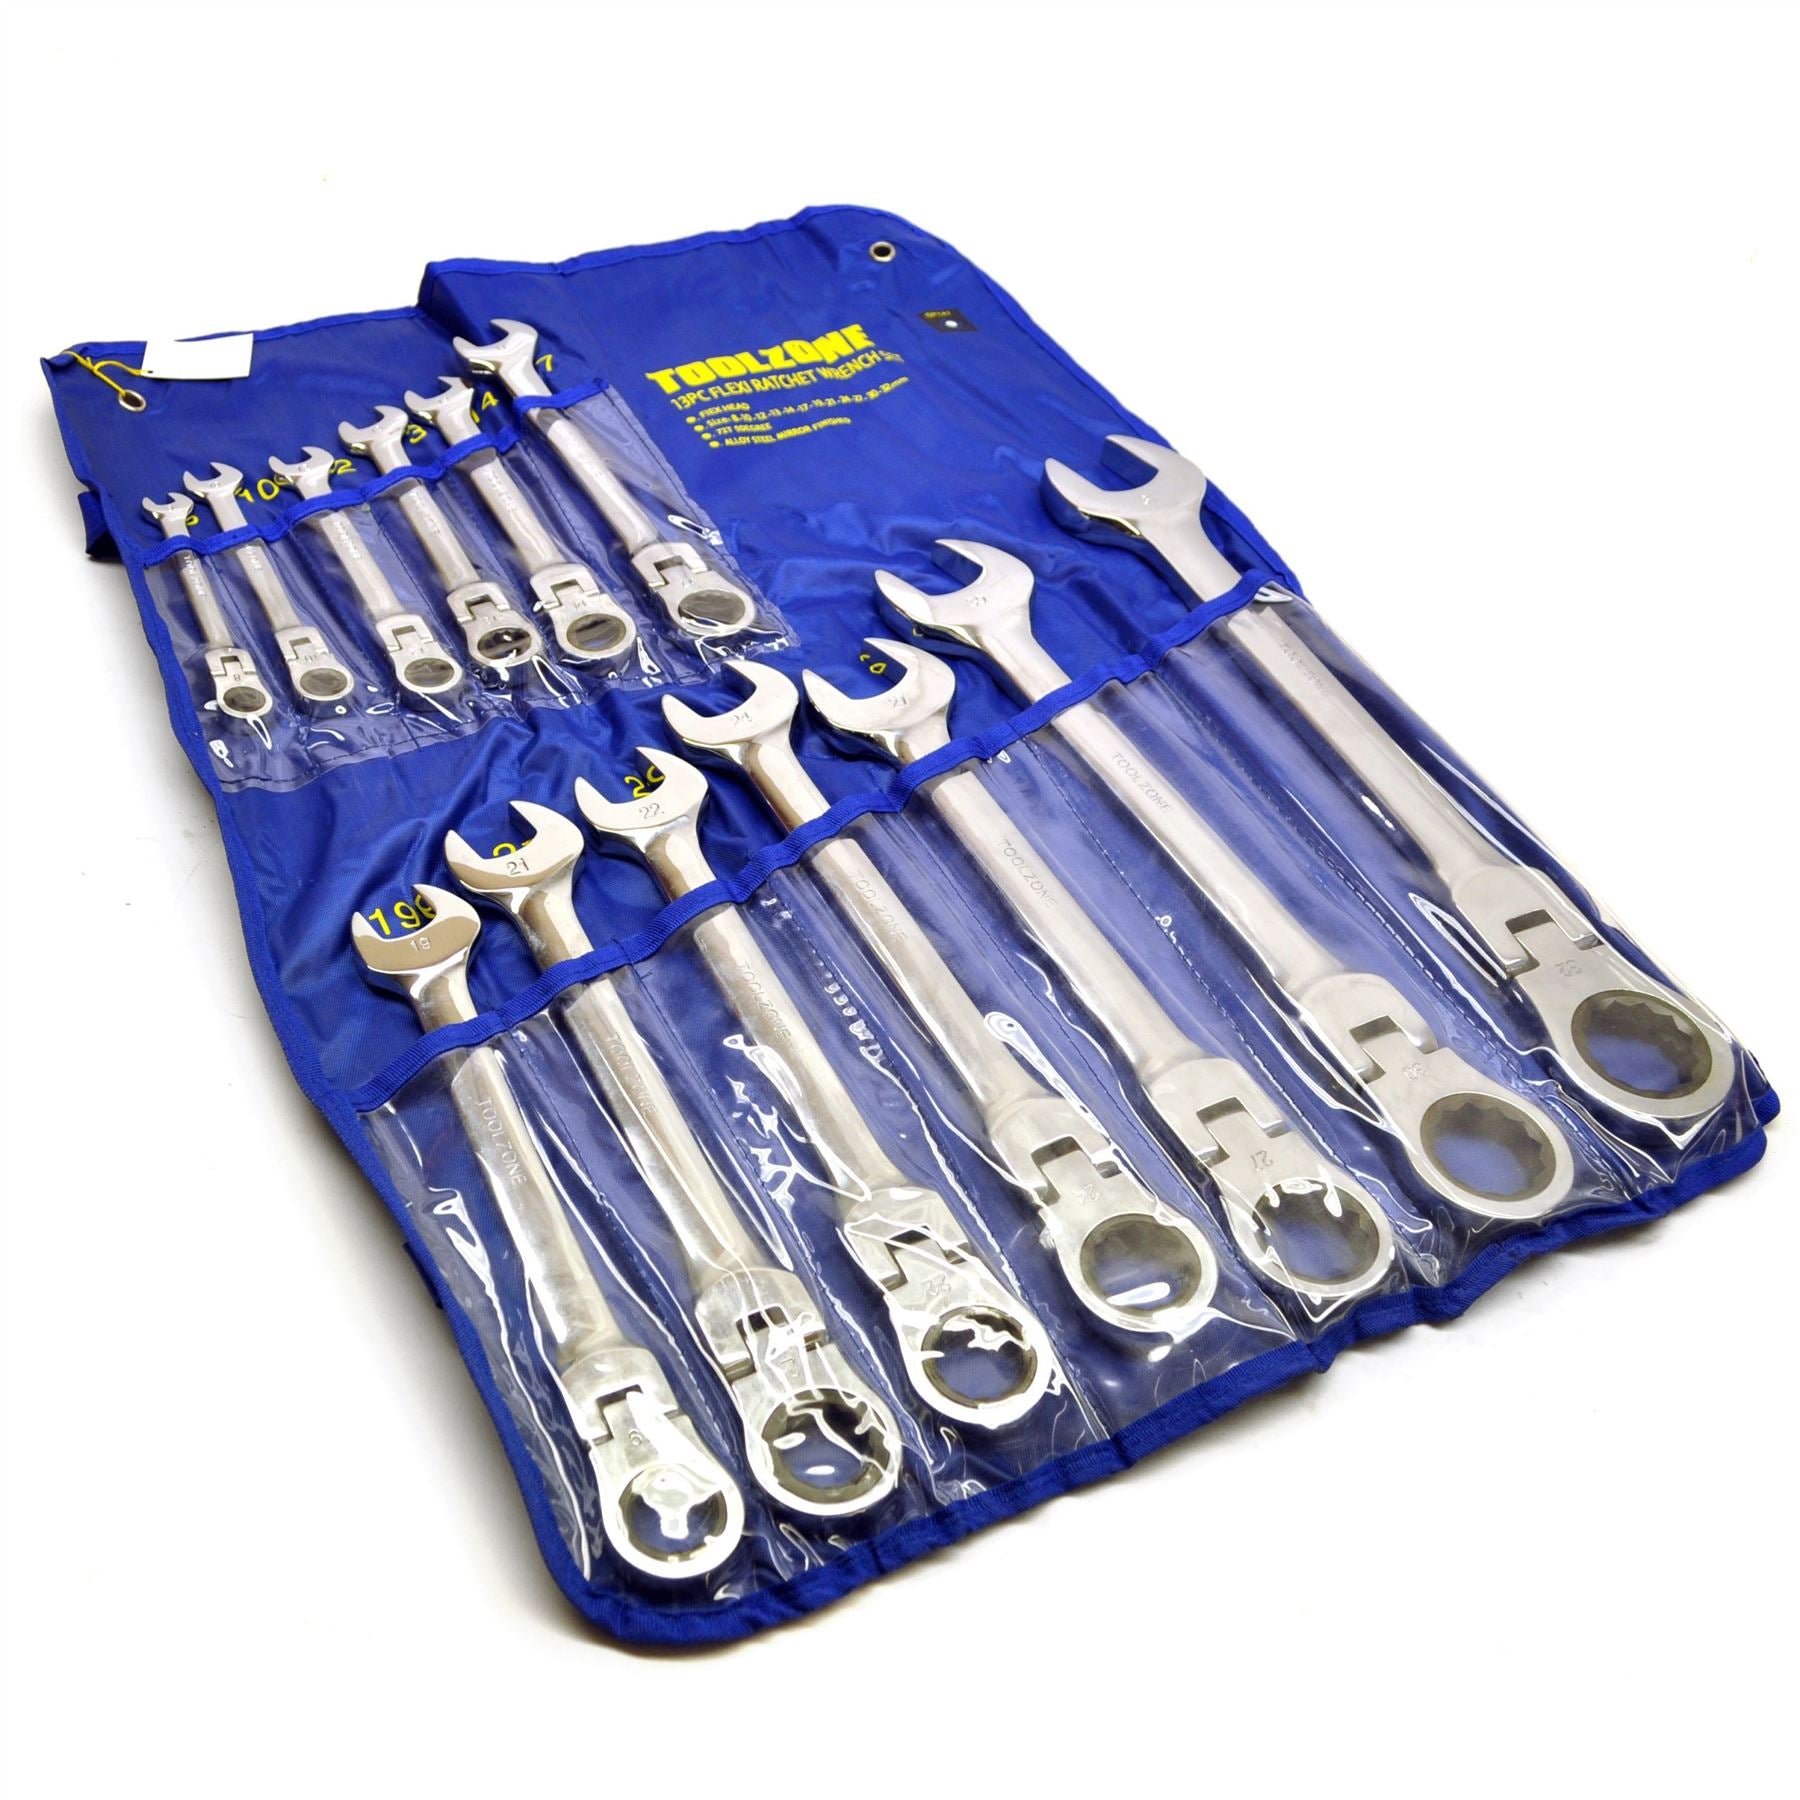 Flexi Head Large Ratchet Ring Spanner Wrench Set 13pc (8mm - 32mm) Metric TE314